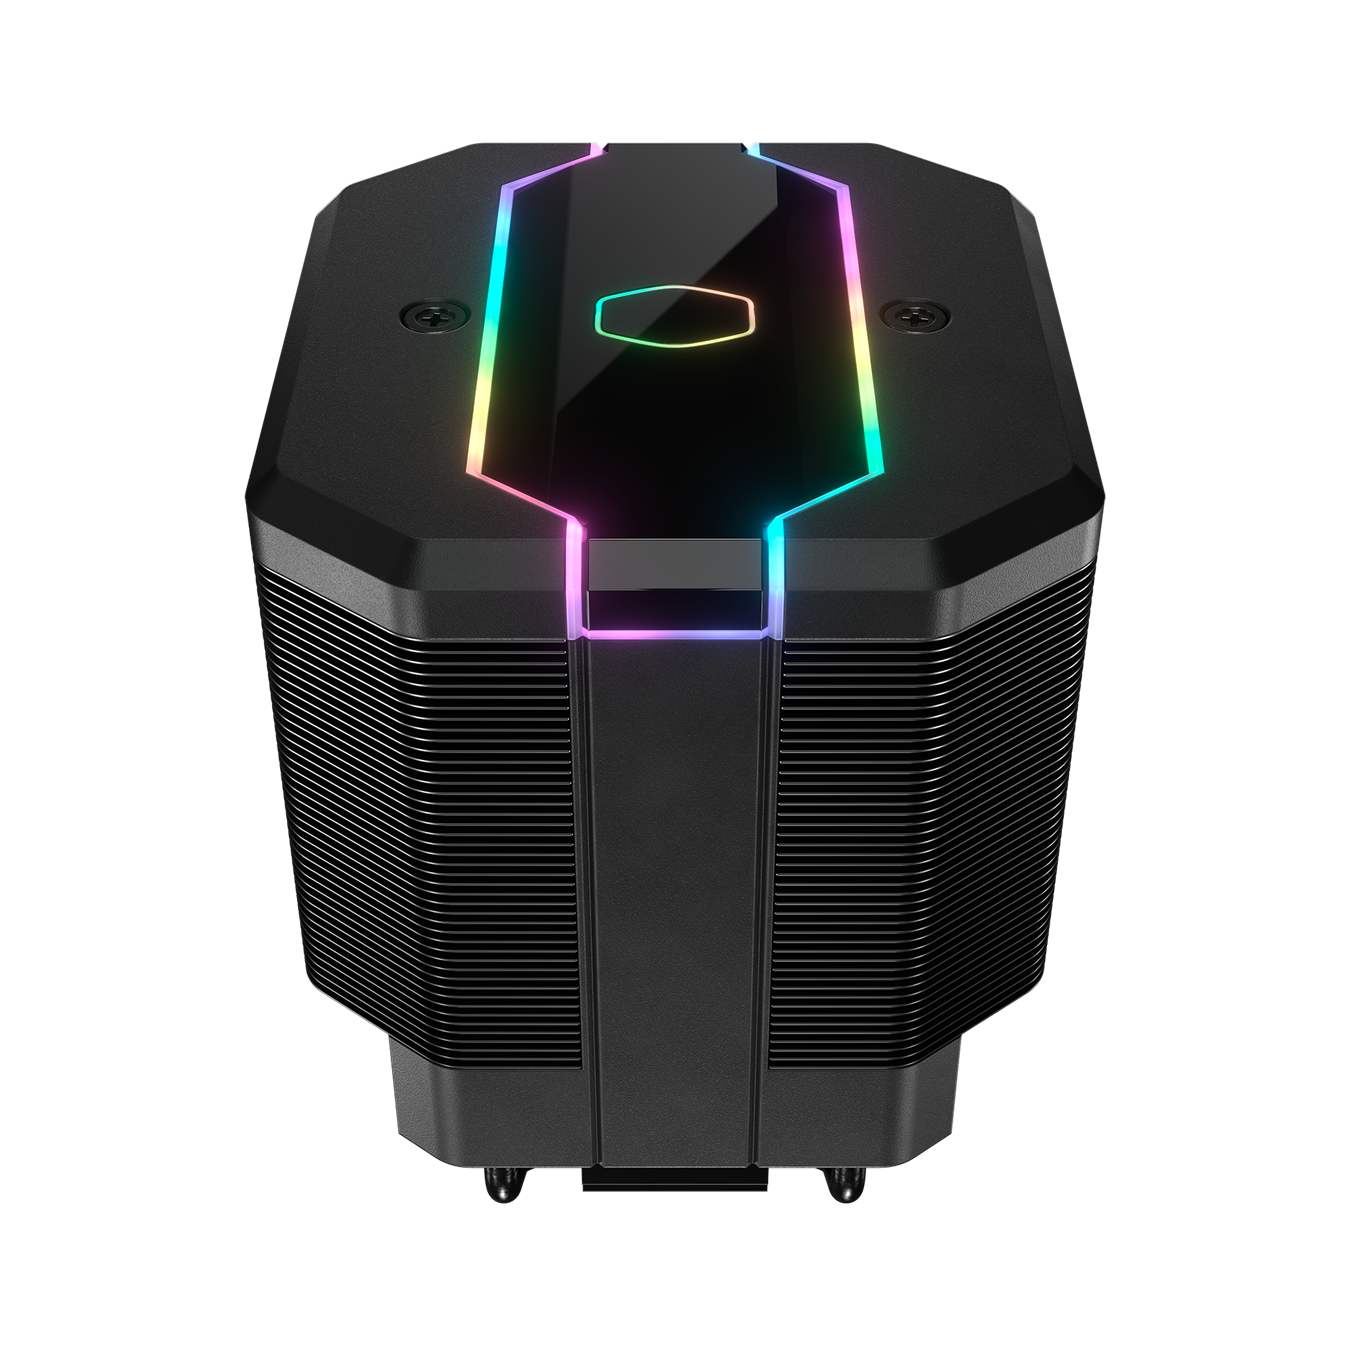 The Cooler Master hexagon logo and embedded Addressable RGB lighting strip provides unique perspective light effect. It is certified to sync with Motherboard RGB software or controlled by our controller.